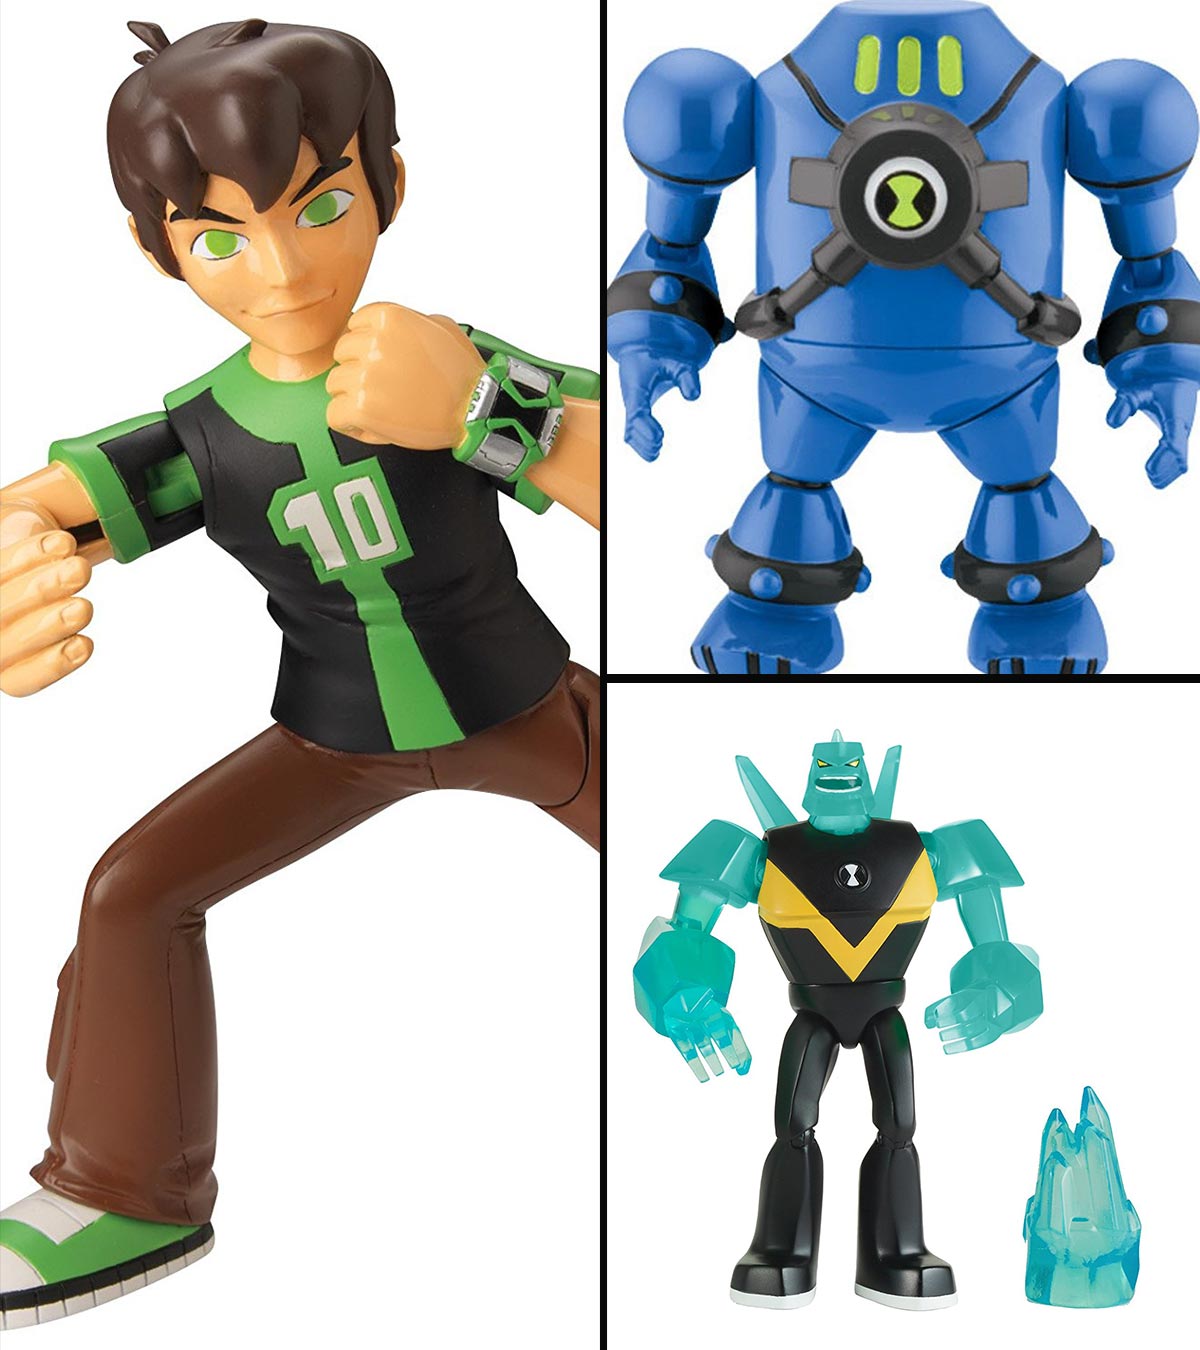 18 Best Ben 10 Toys For Kids In 2023, As Per A Play Therapist